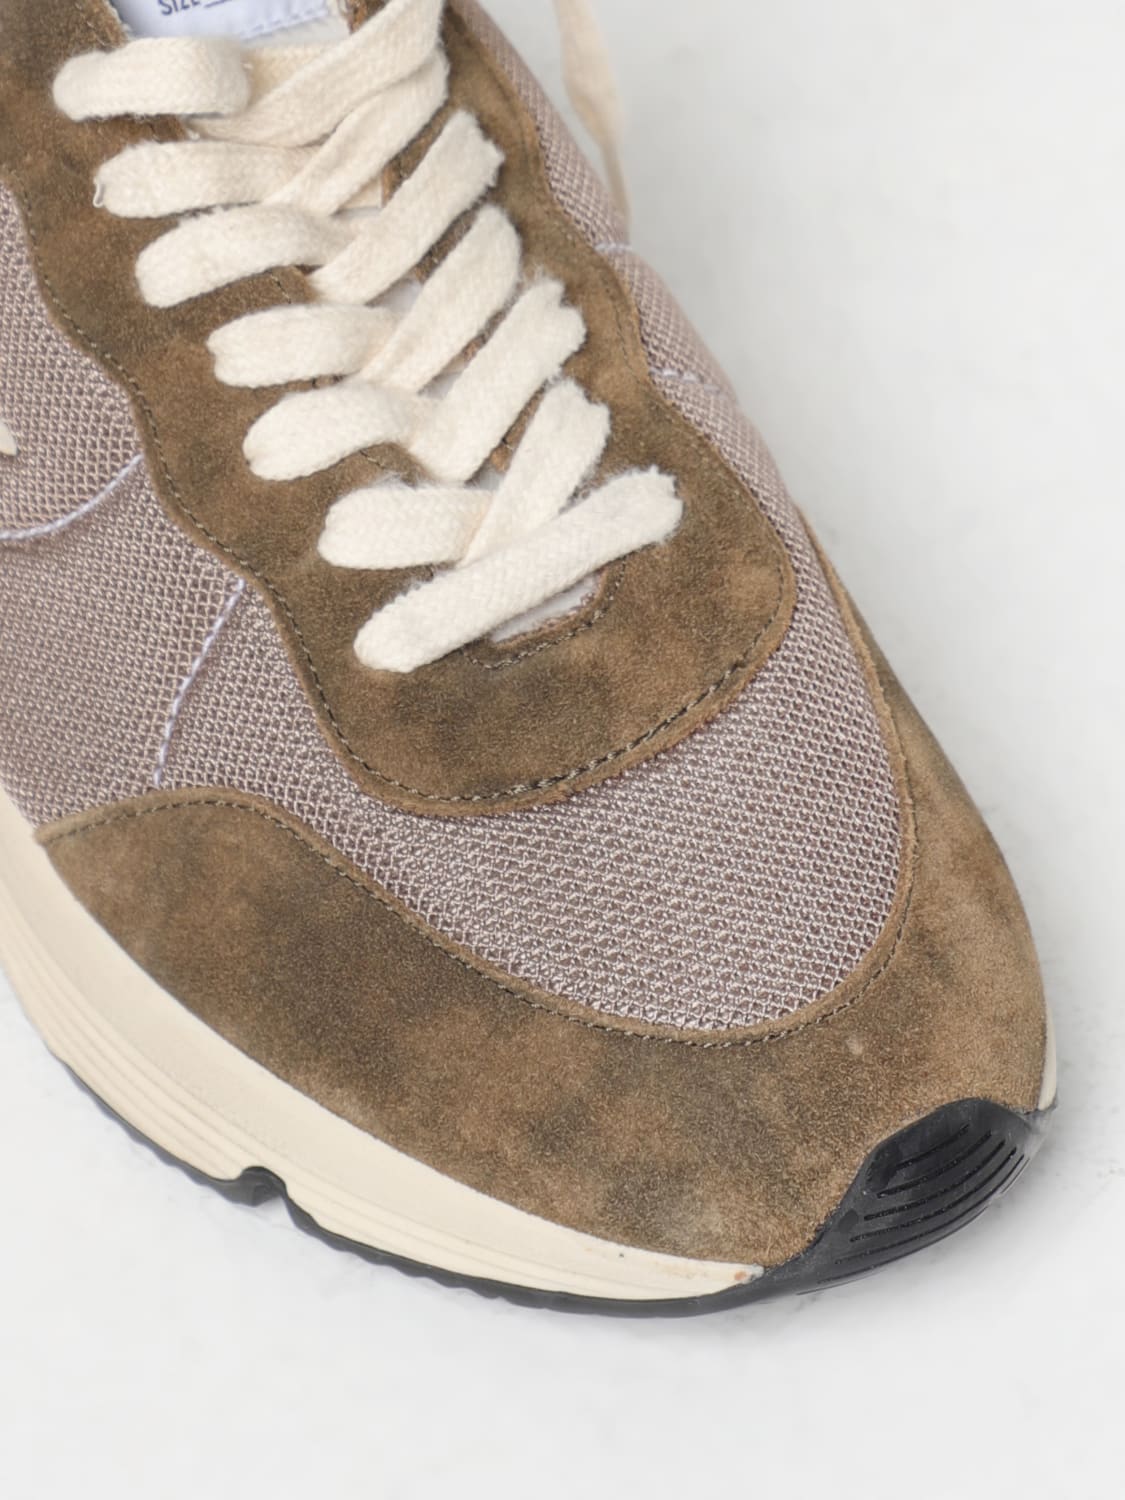 GOLDEN GOOSE: Sole sneakers in suede - Green | Golden Goose sneakers GMF00272F00324935812 online at GIGLIO.COM